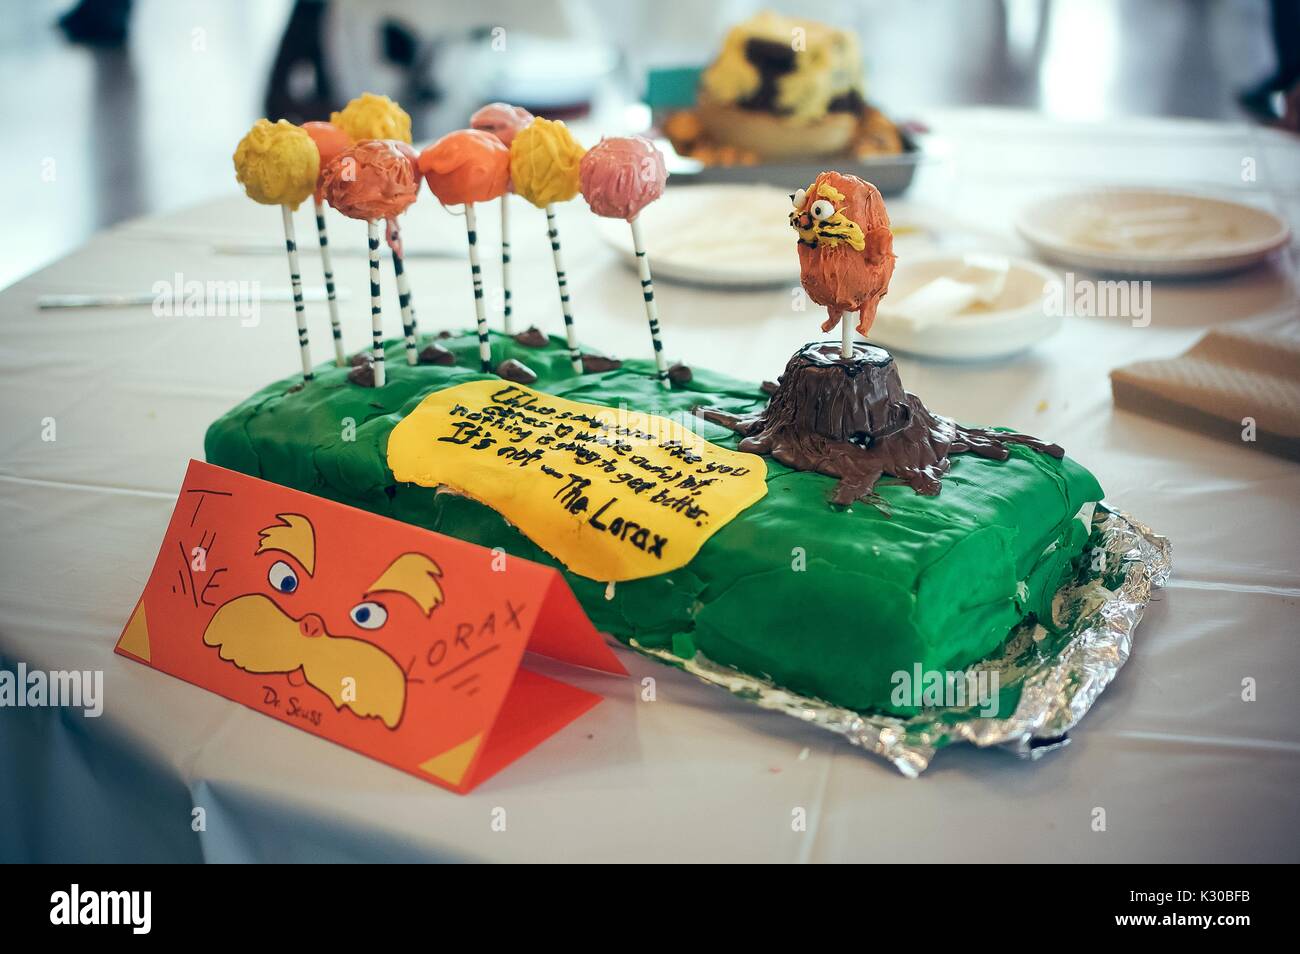 Lorax cake at the Johns Hopkins University's annual 'Read It And Eat It' Edible Book Festival on the Homewood campus in Baltimore, Maryland, March, 2016. Courtesy Eric Chen. Stock Photo